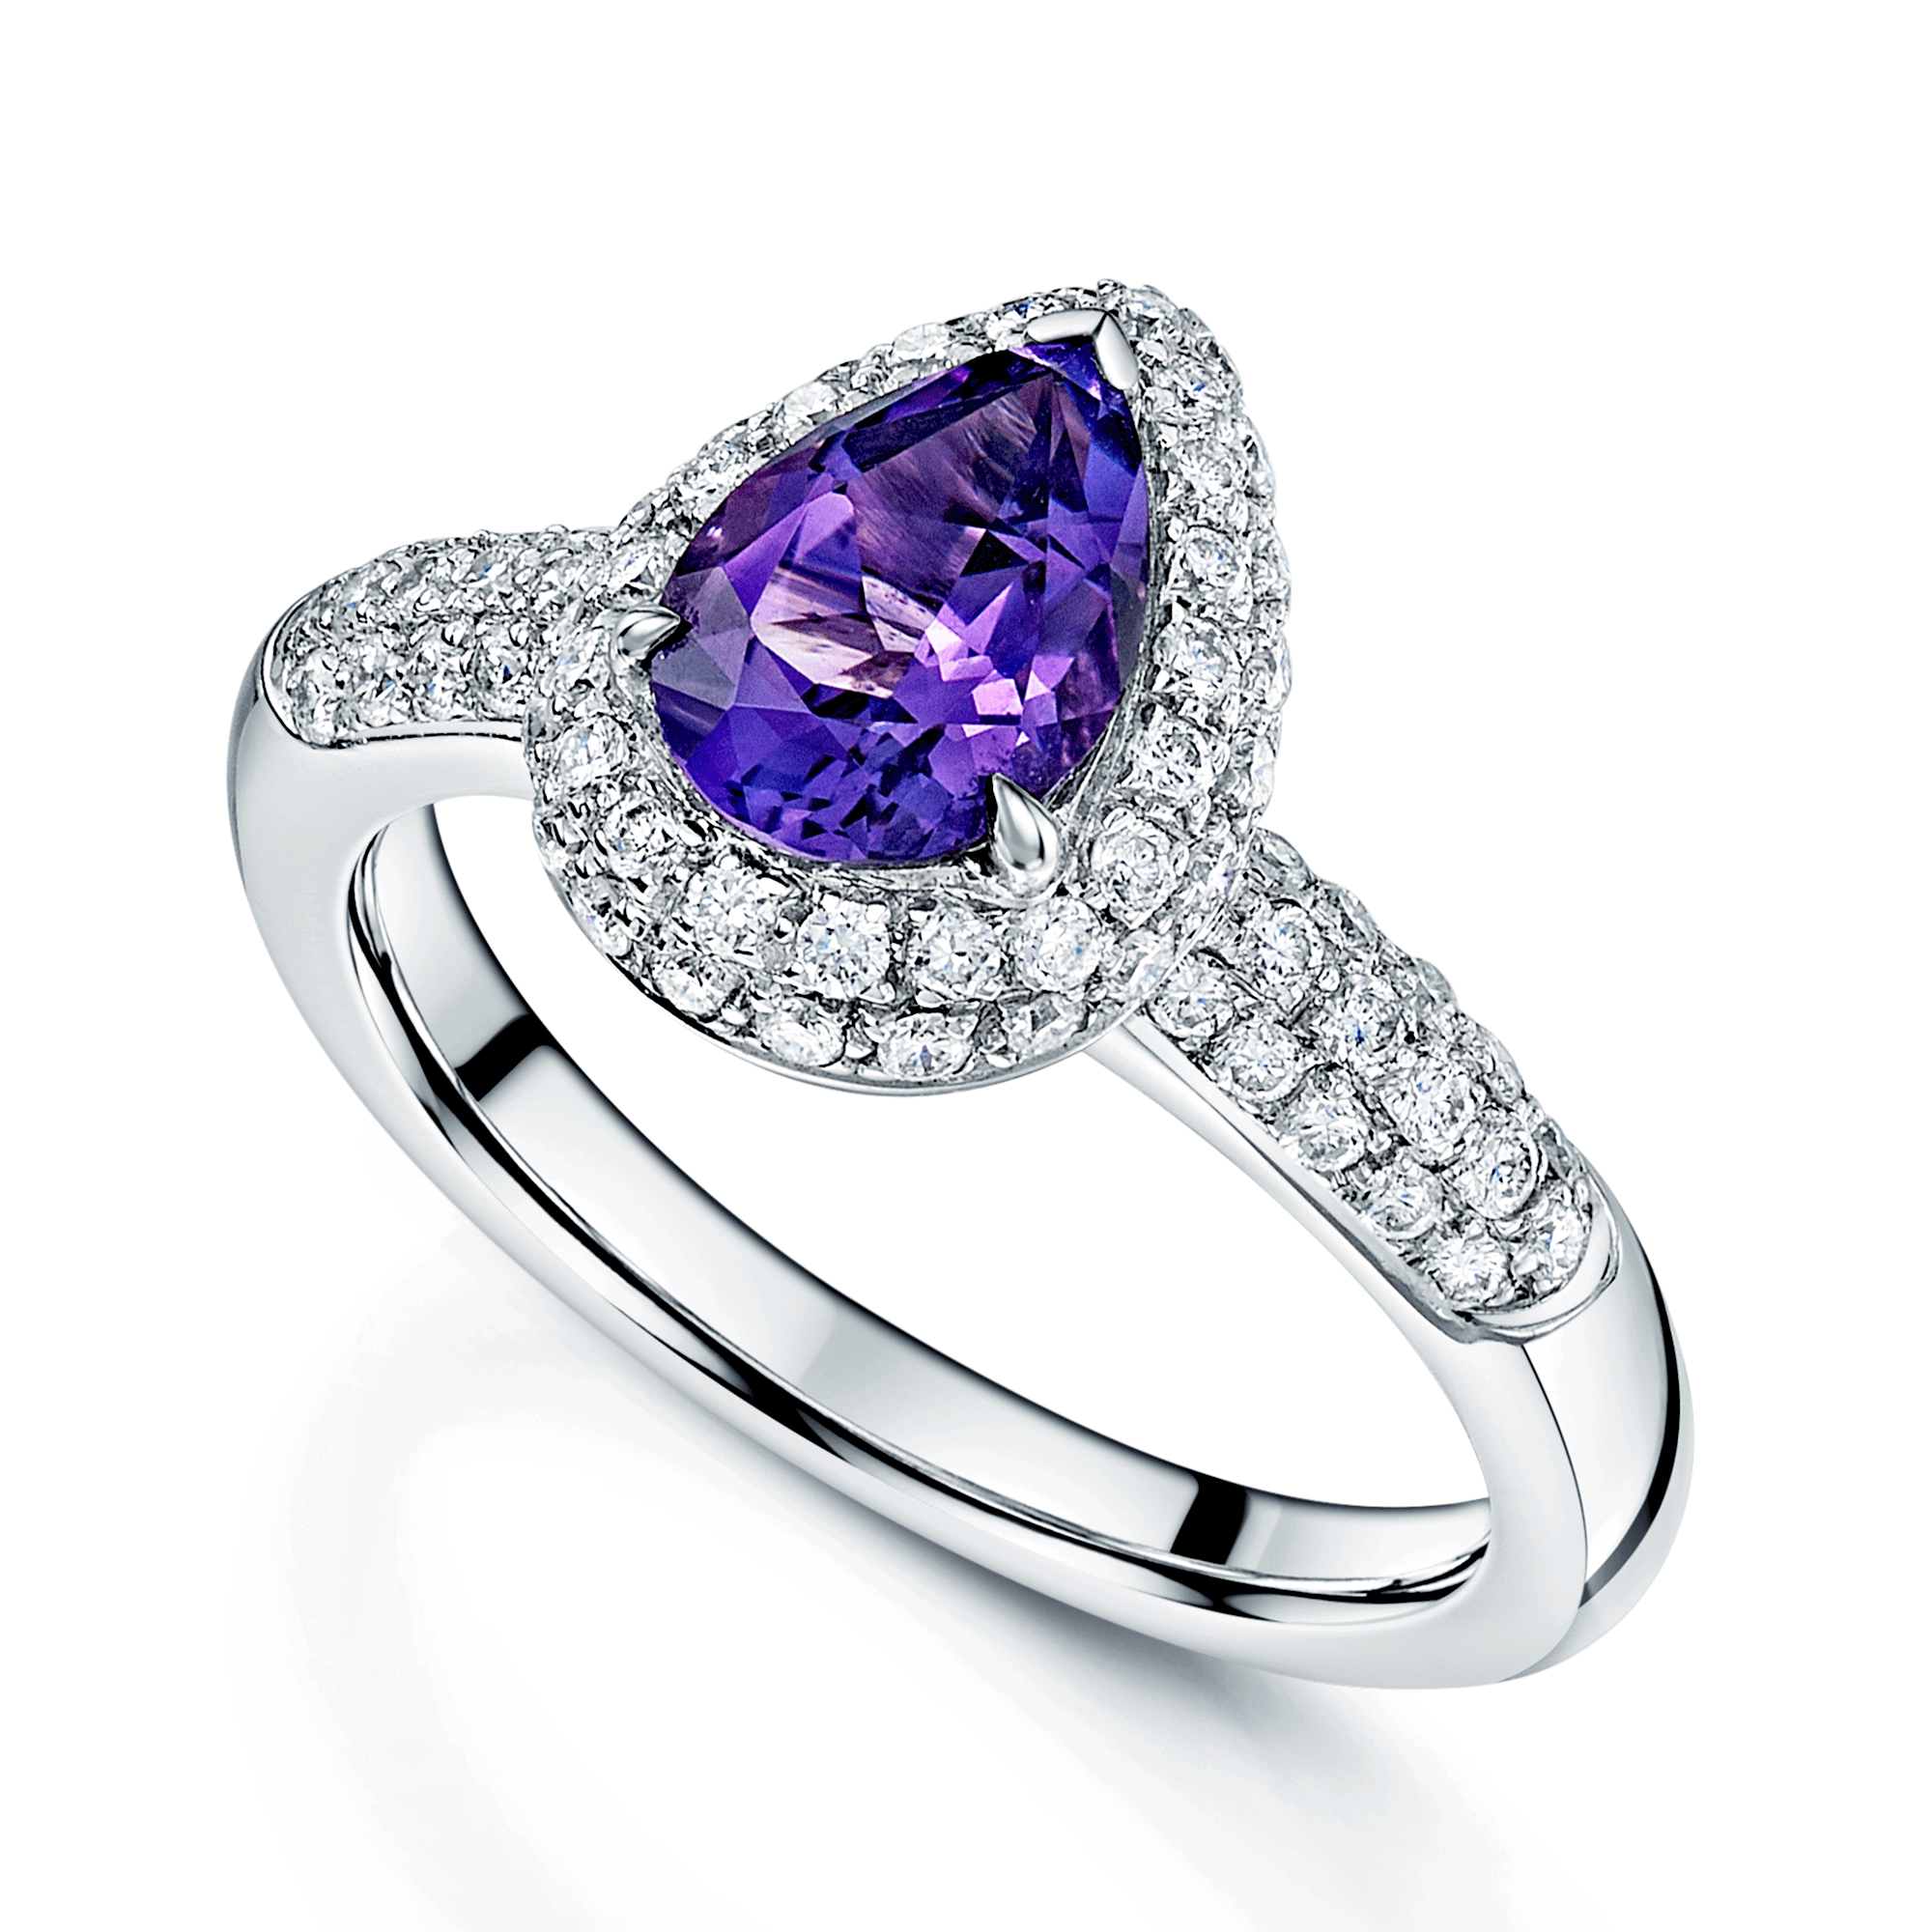 18ct White Gold Pear Cut Amethyst And Diamond Halo Ring With Diamond Set Shoulders.